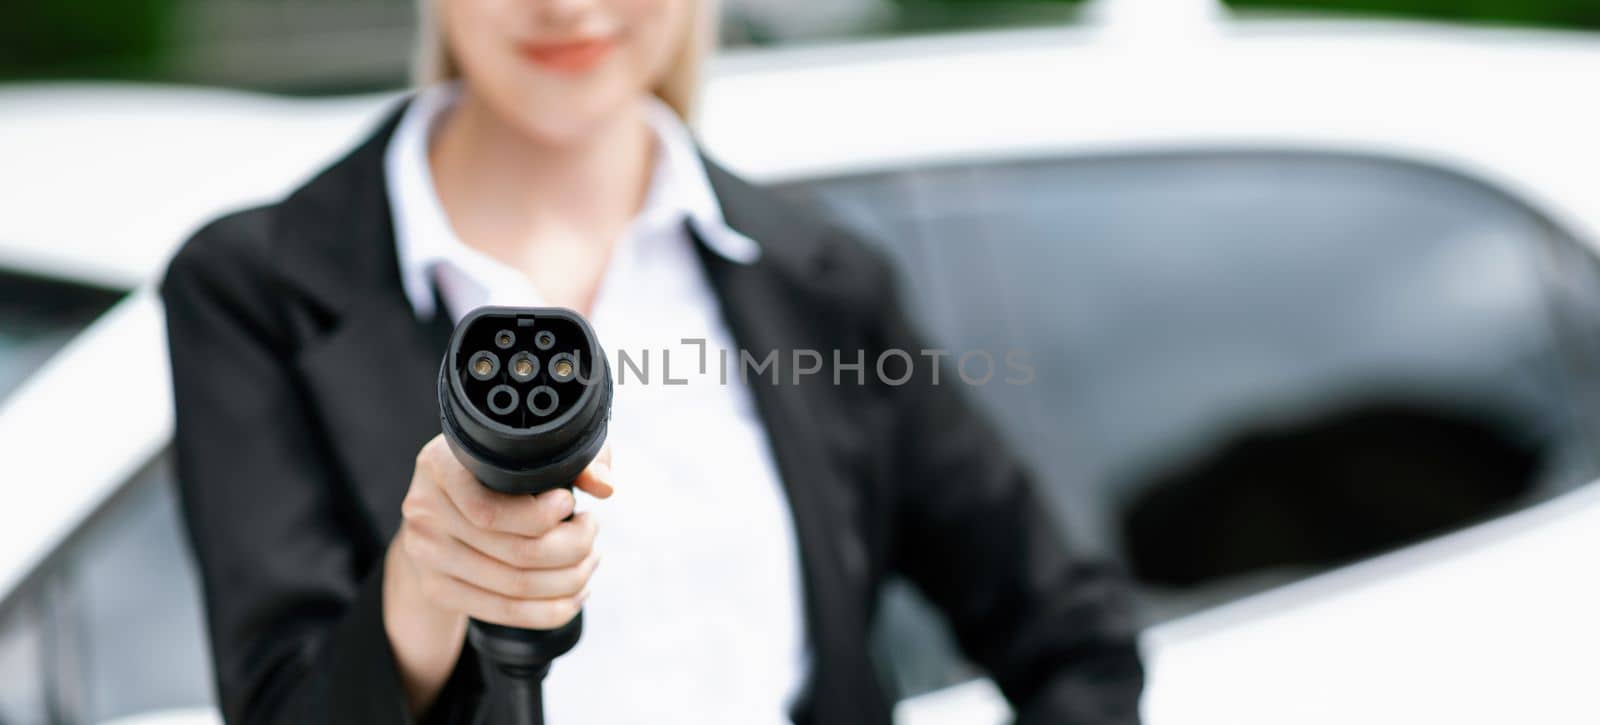 Blur closeup businesswoman hand holding and pointing an EV plug at camera for electric vehicle as progressive idea of alternative sustainable clean and green energy for environmental concern.